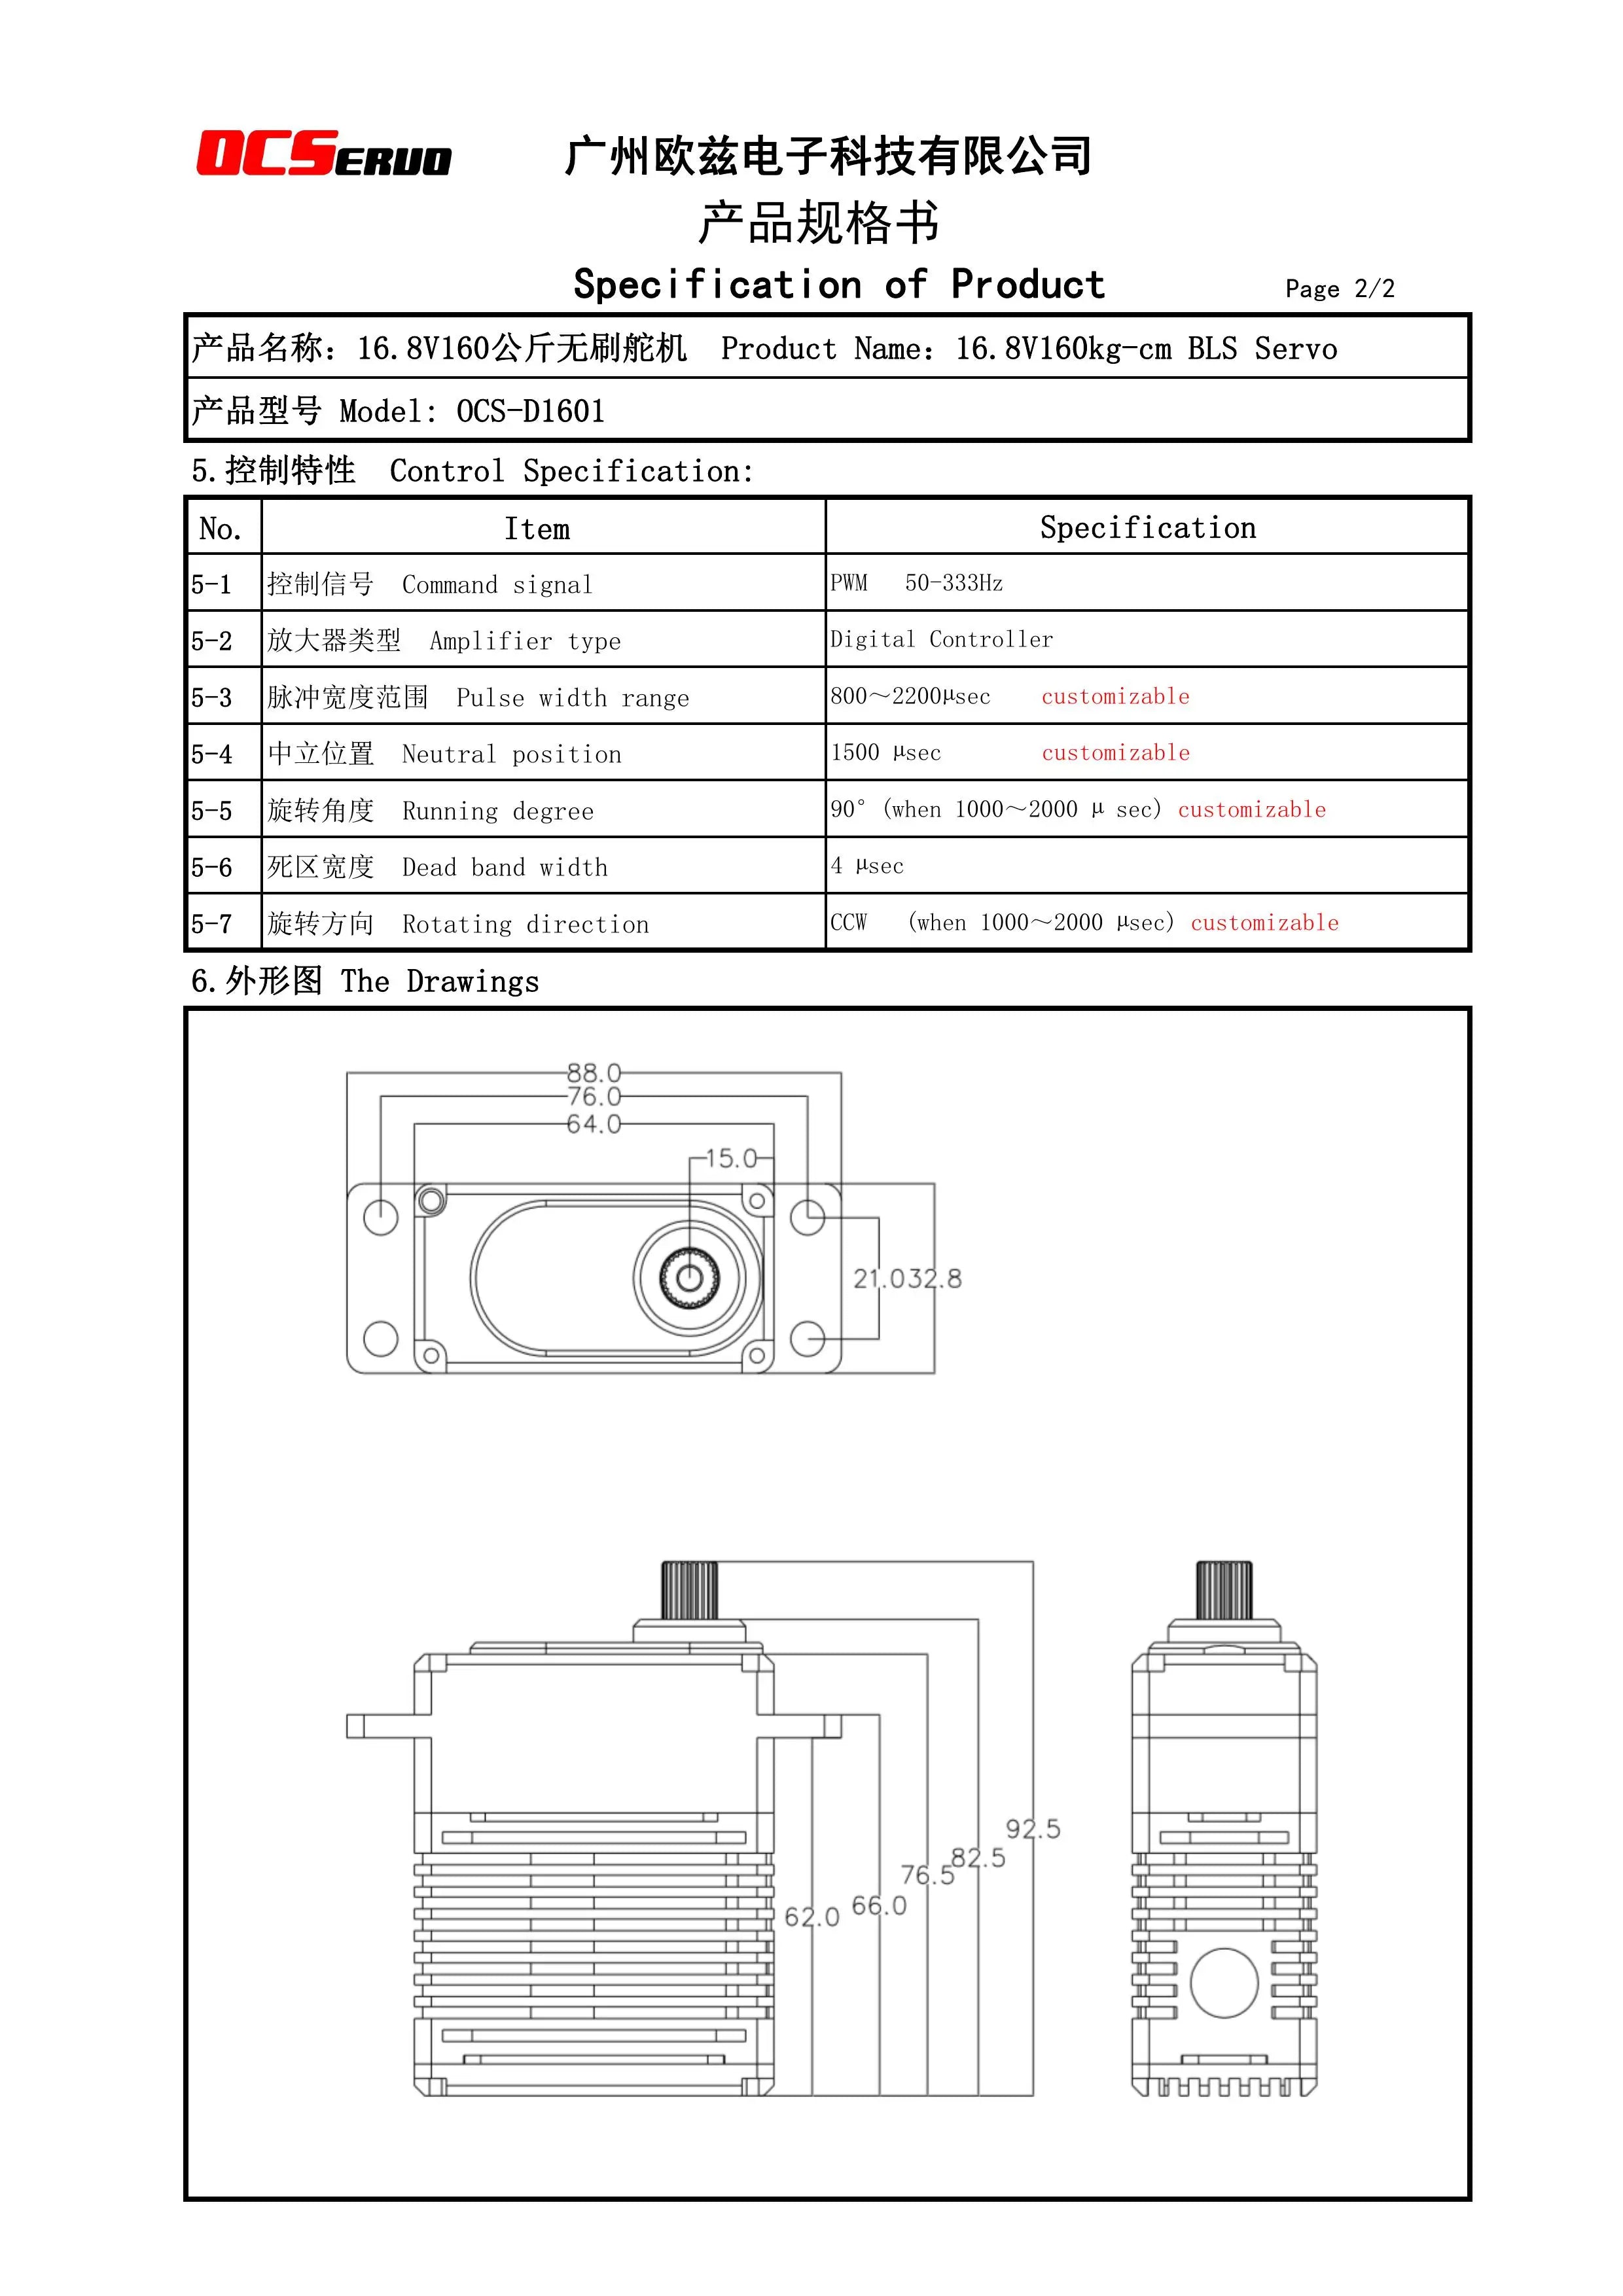 OCServo, j@mll#N Control Specification: No_ Item Specification 5-1